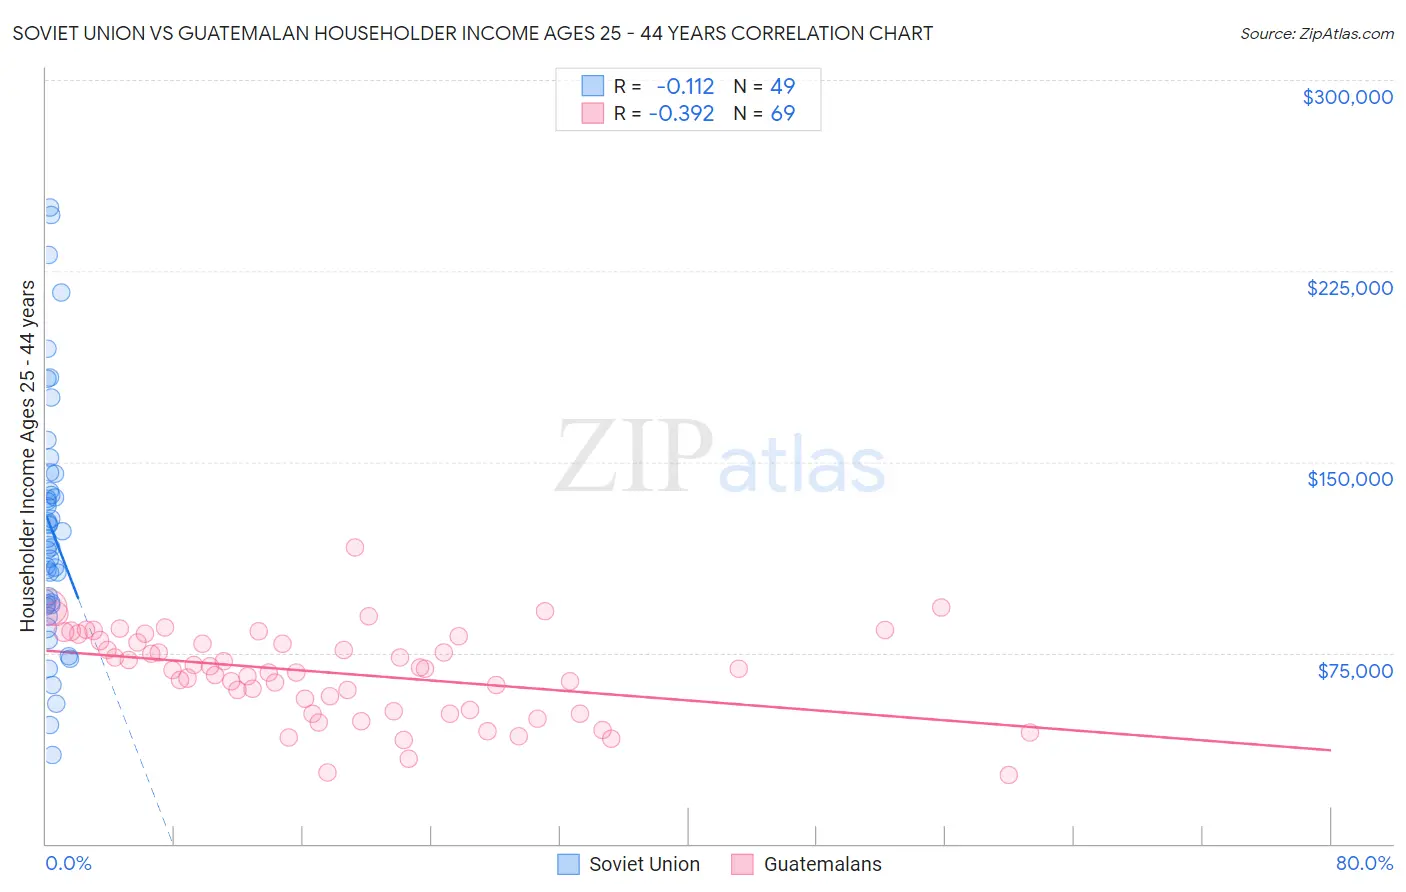 Soviet Union vs Guatemalan Householder Income Ages 25 - 44 years